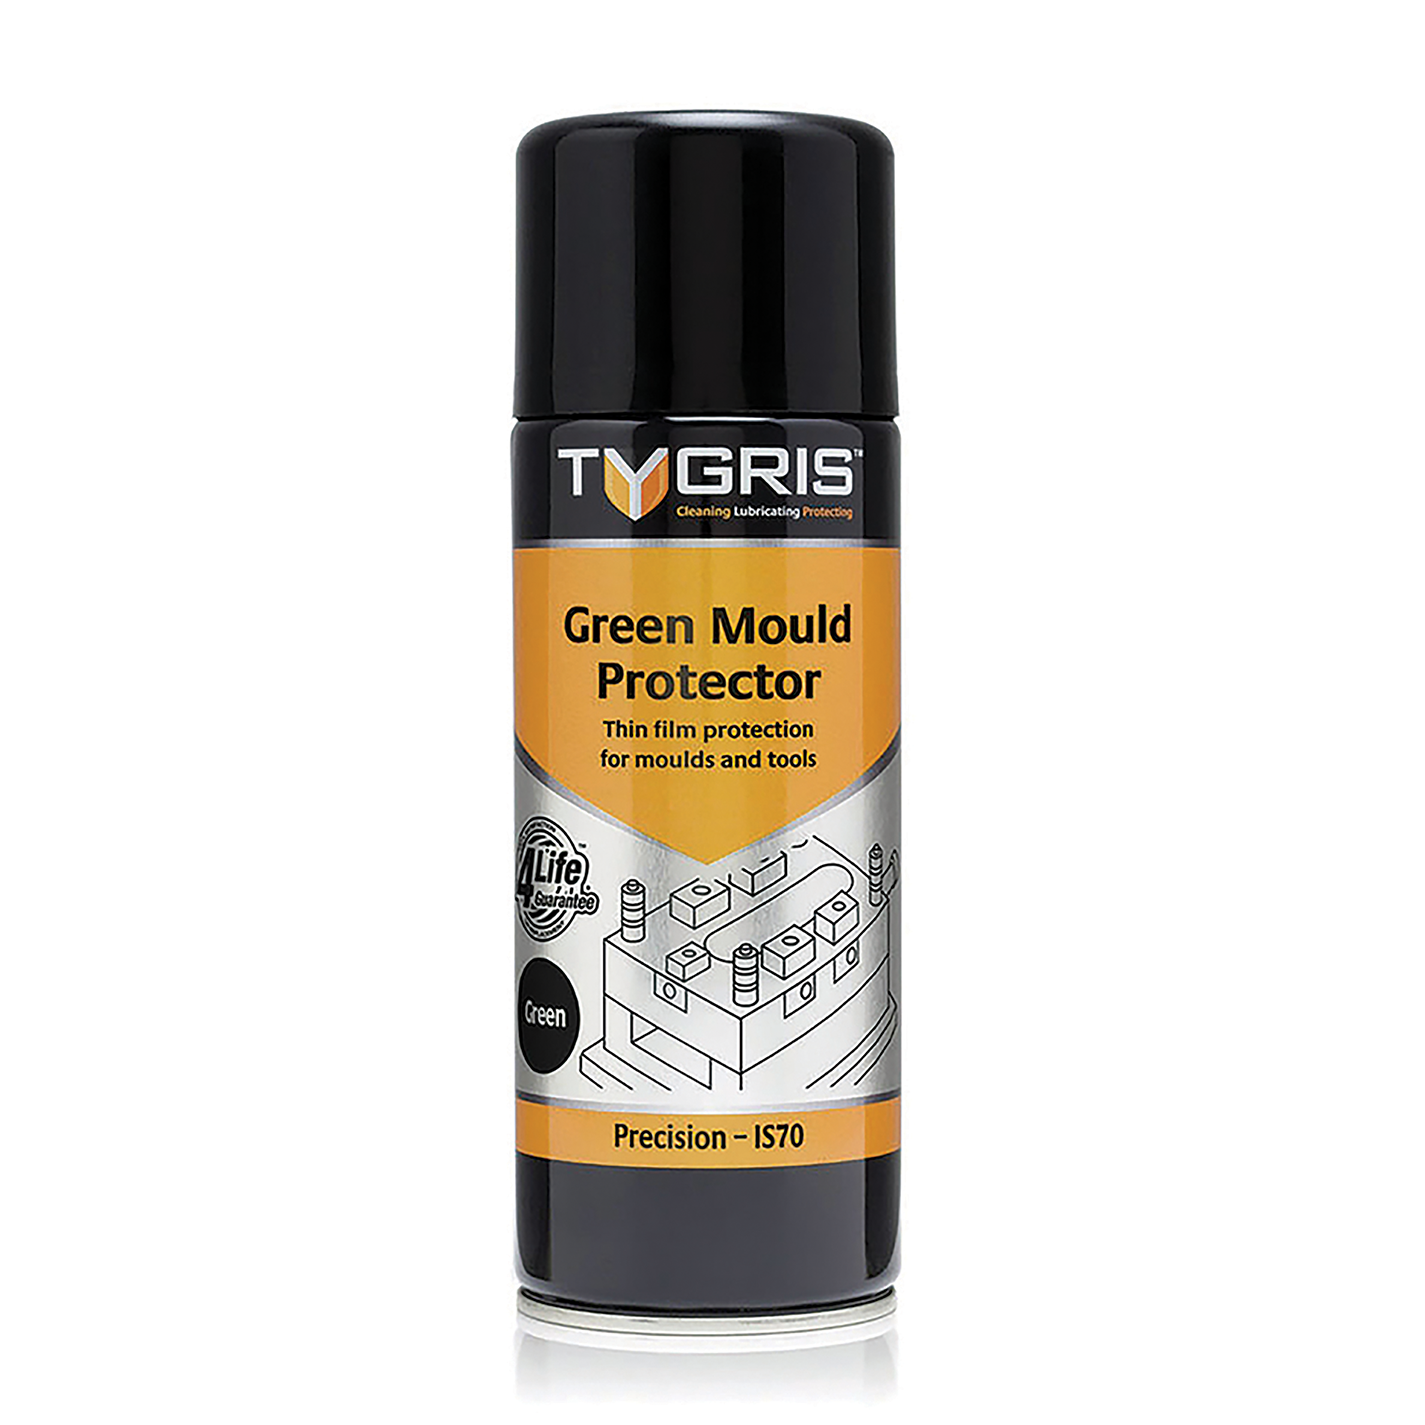 GREEN MOULD PROTECTOR